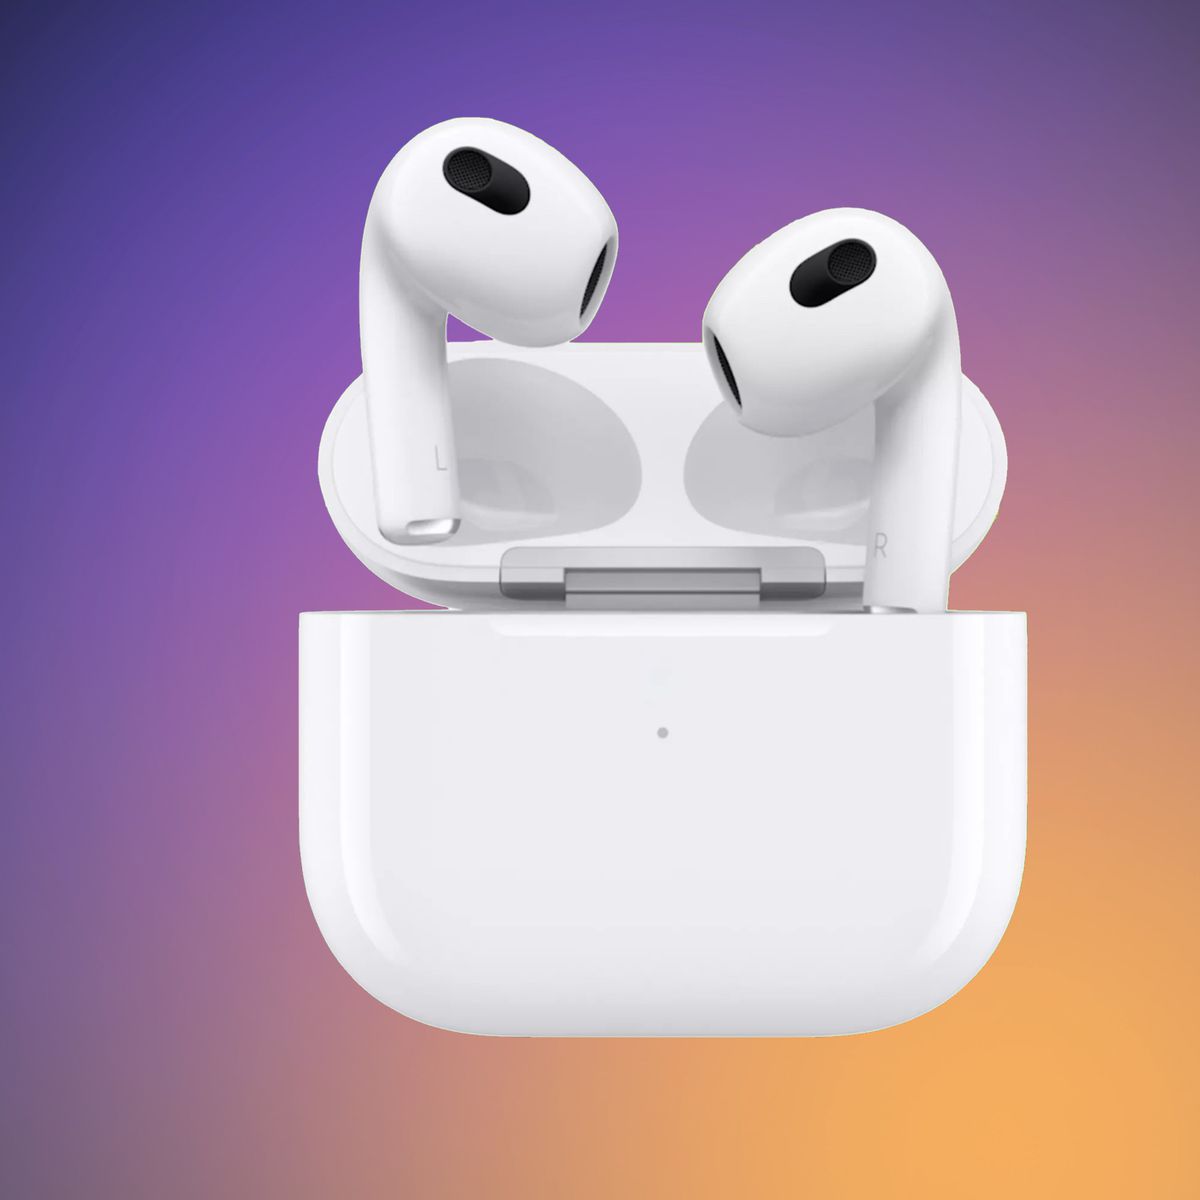 iOS 16.4 Seemingly References New AirPods and AirPods Case - MacRumors